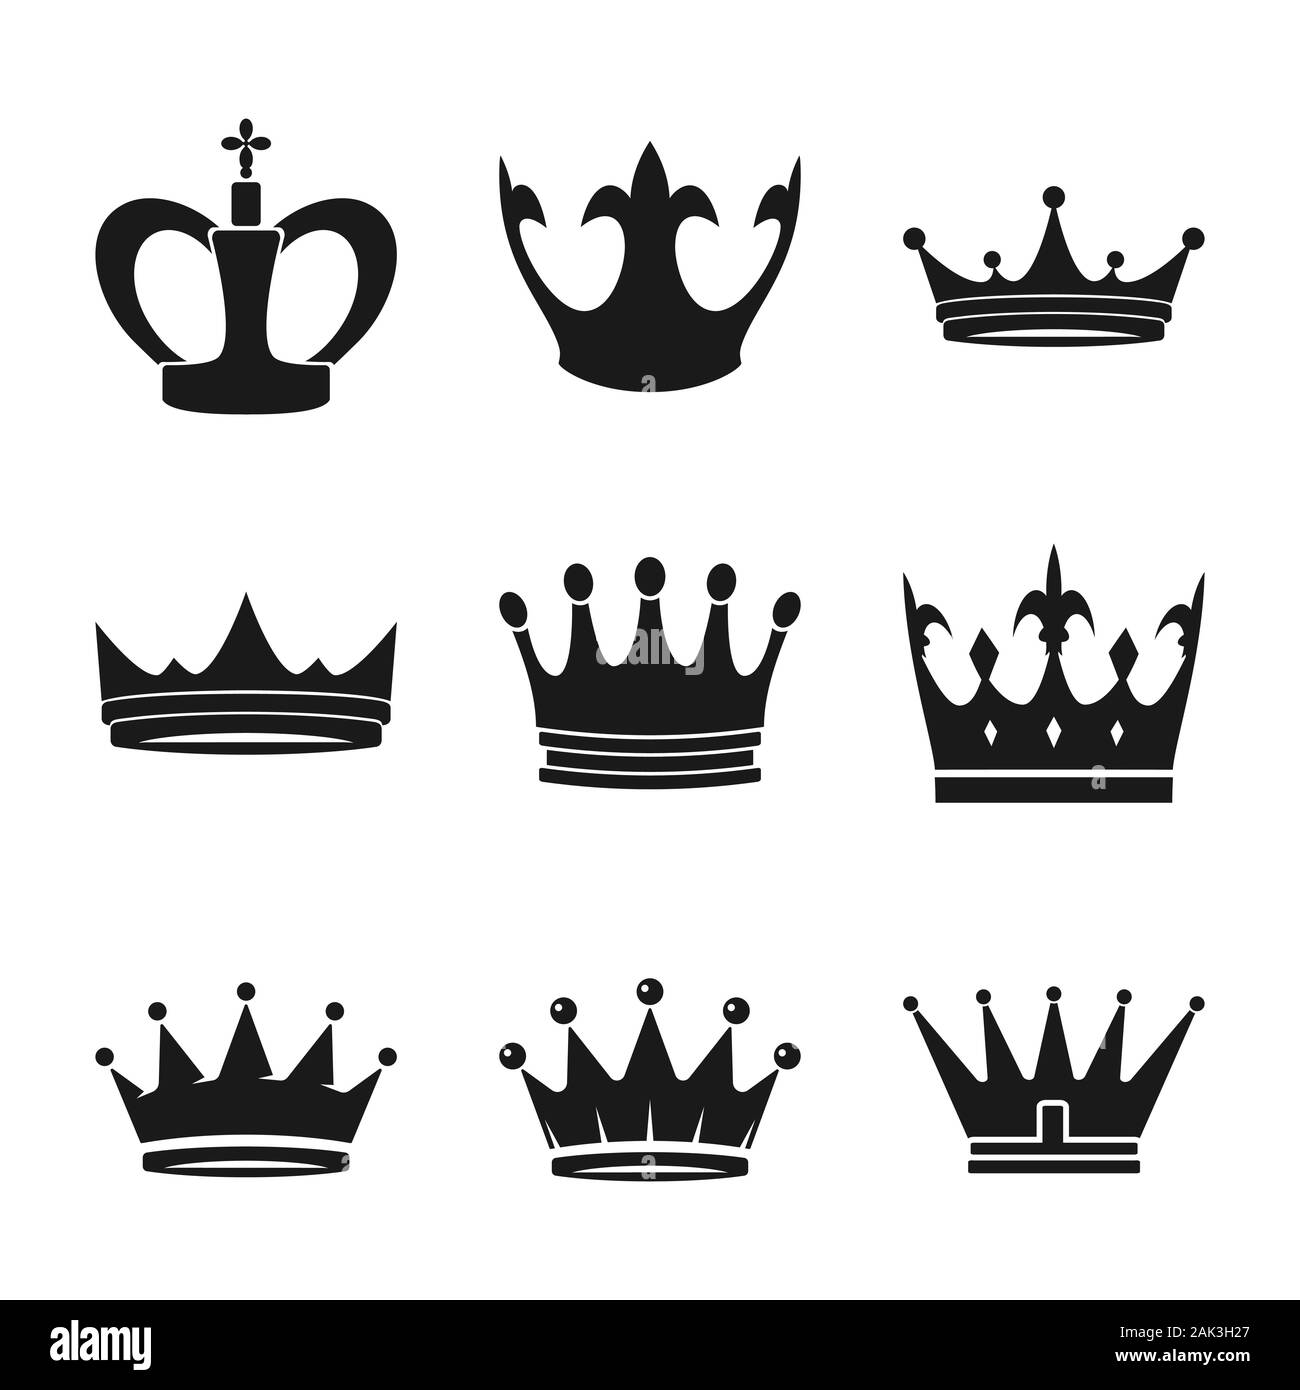 Crown symbols set. Vector icons collection Stock Vector